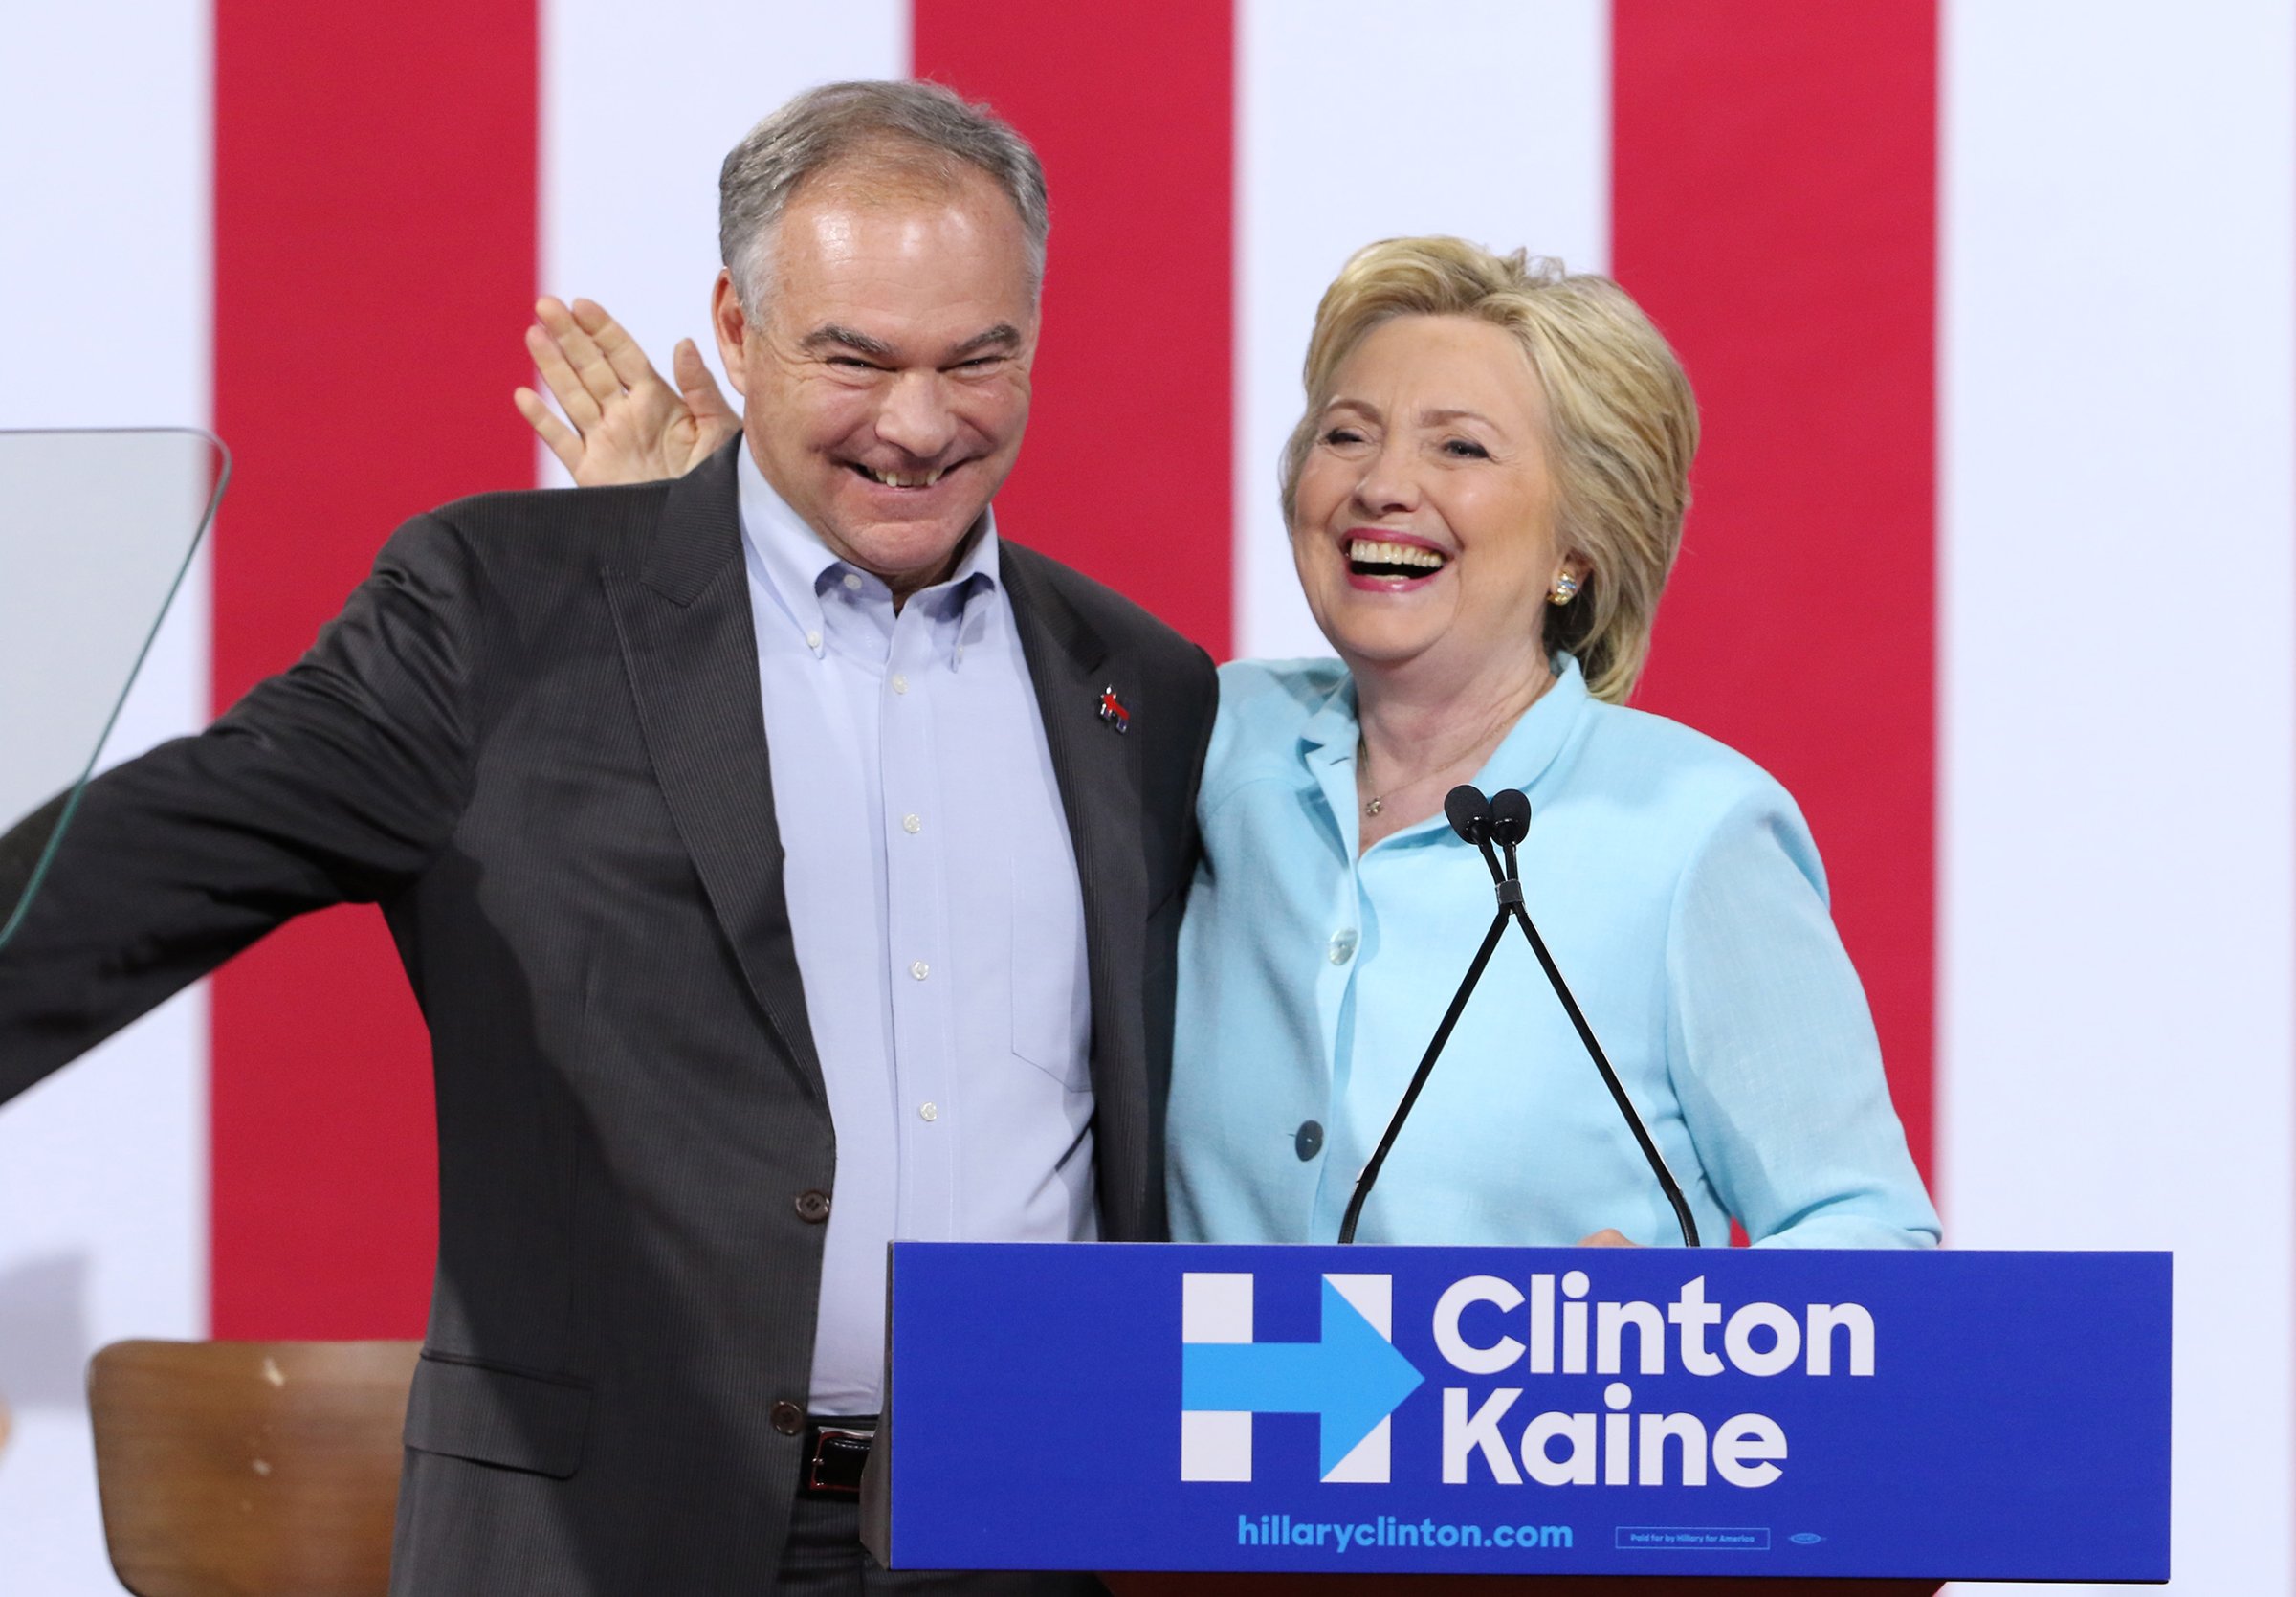 Hillary Clinton and Democratic vice presidential candidate U.S. Sen. Tim Kaine attend a campaign rally at Florida International University Panther Arena in Miami, Fla., on July 23, 2016.